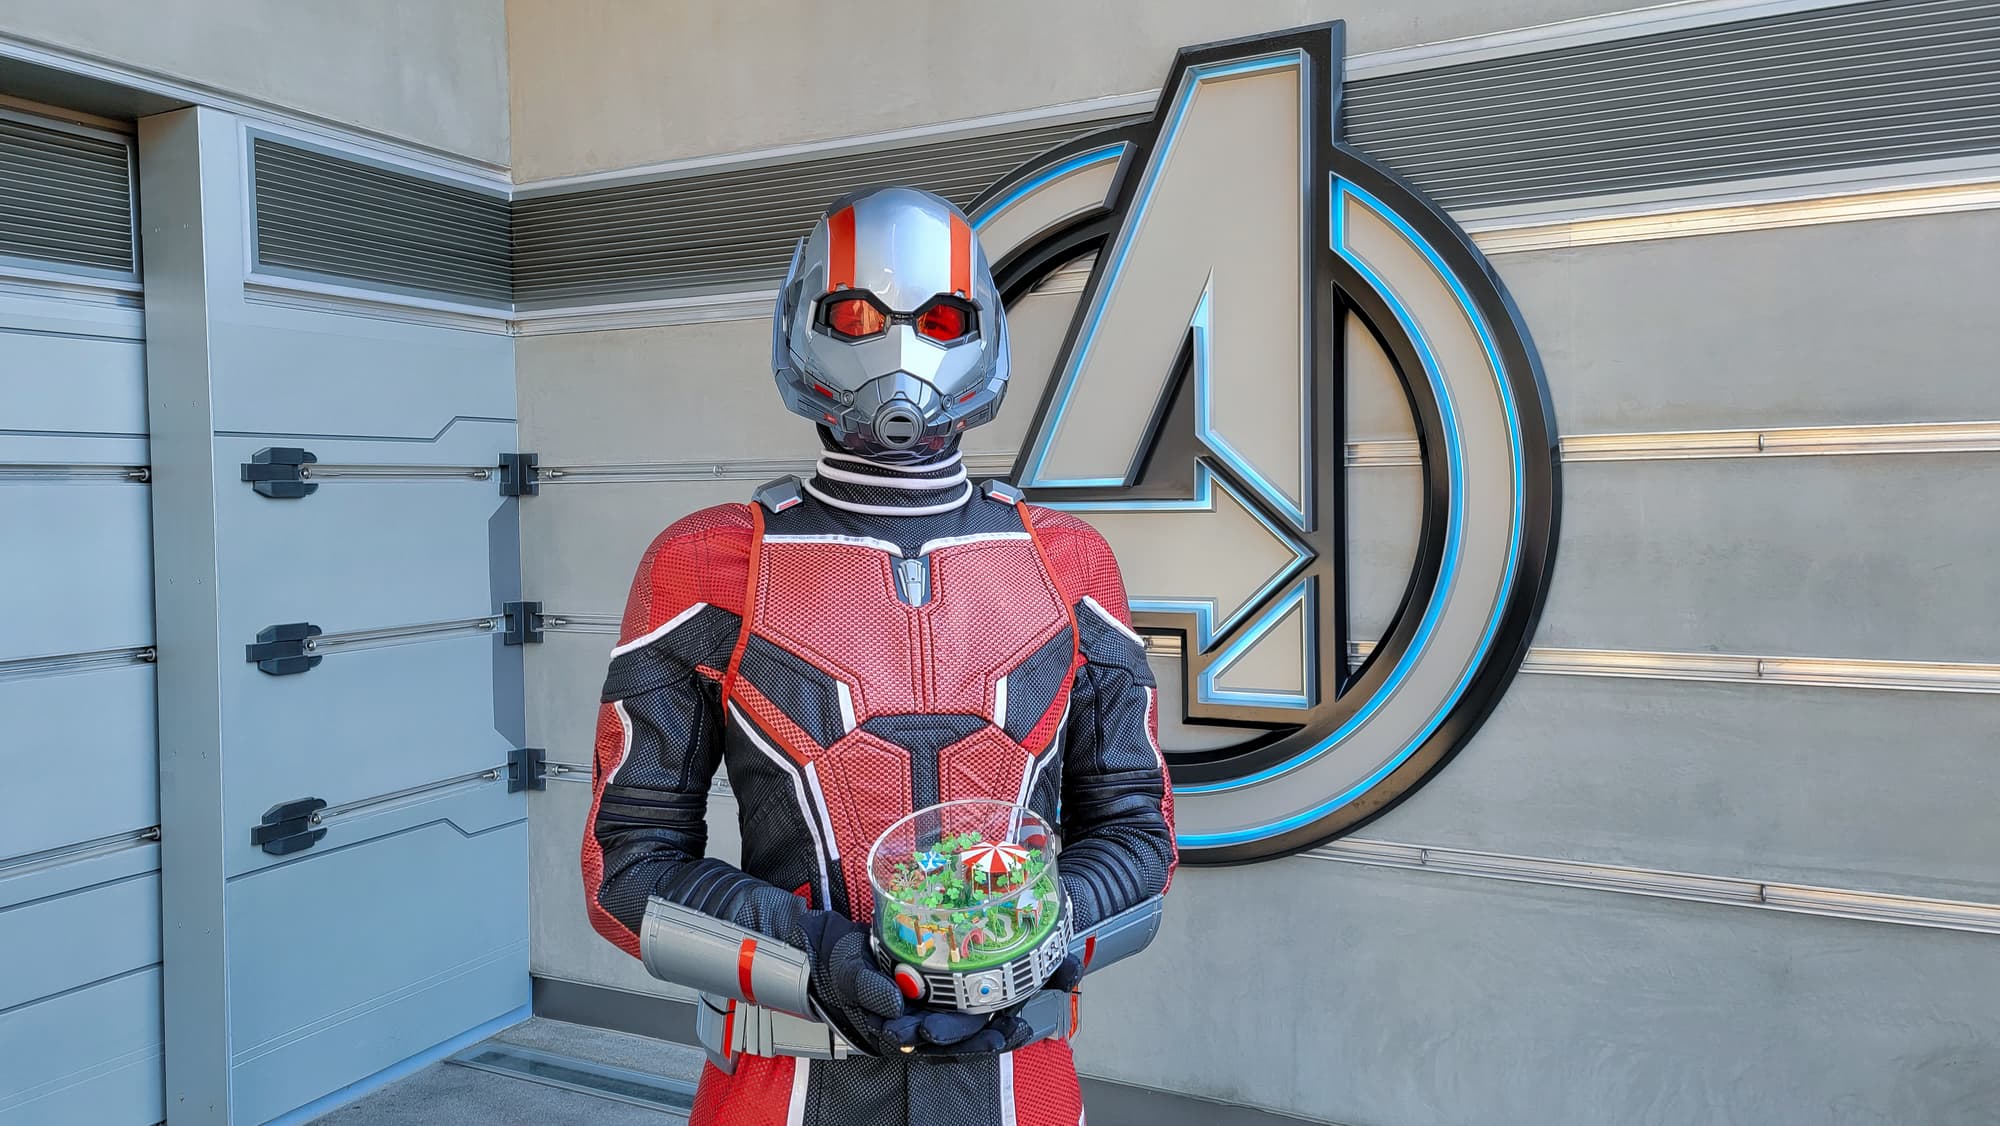 acampar clima Gigante Avengers Campus: Ant-Man Reveals New Attraction Just for His Ant Friends |  Marvel